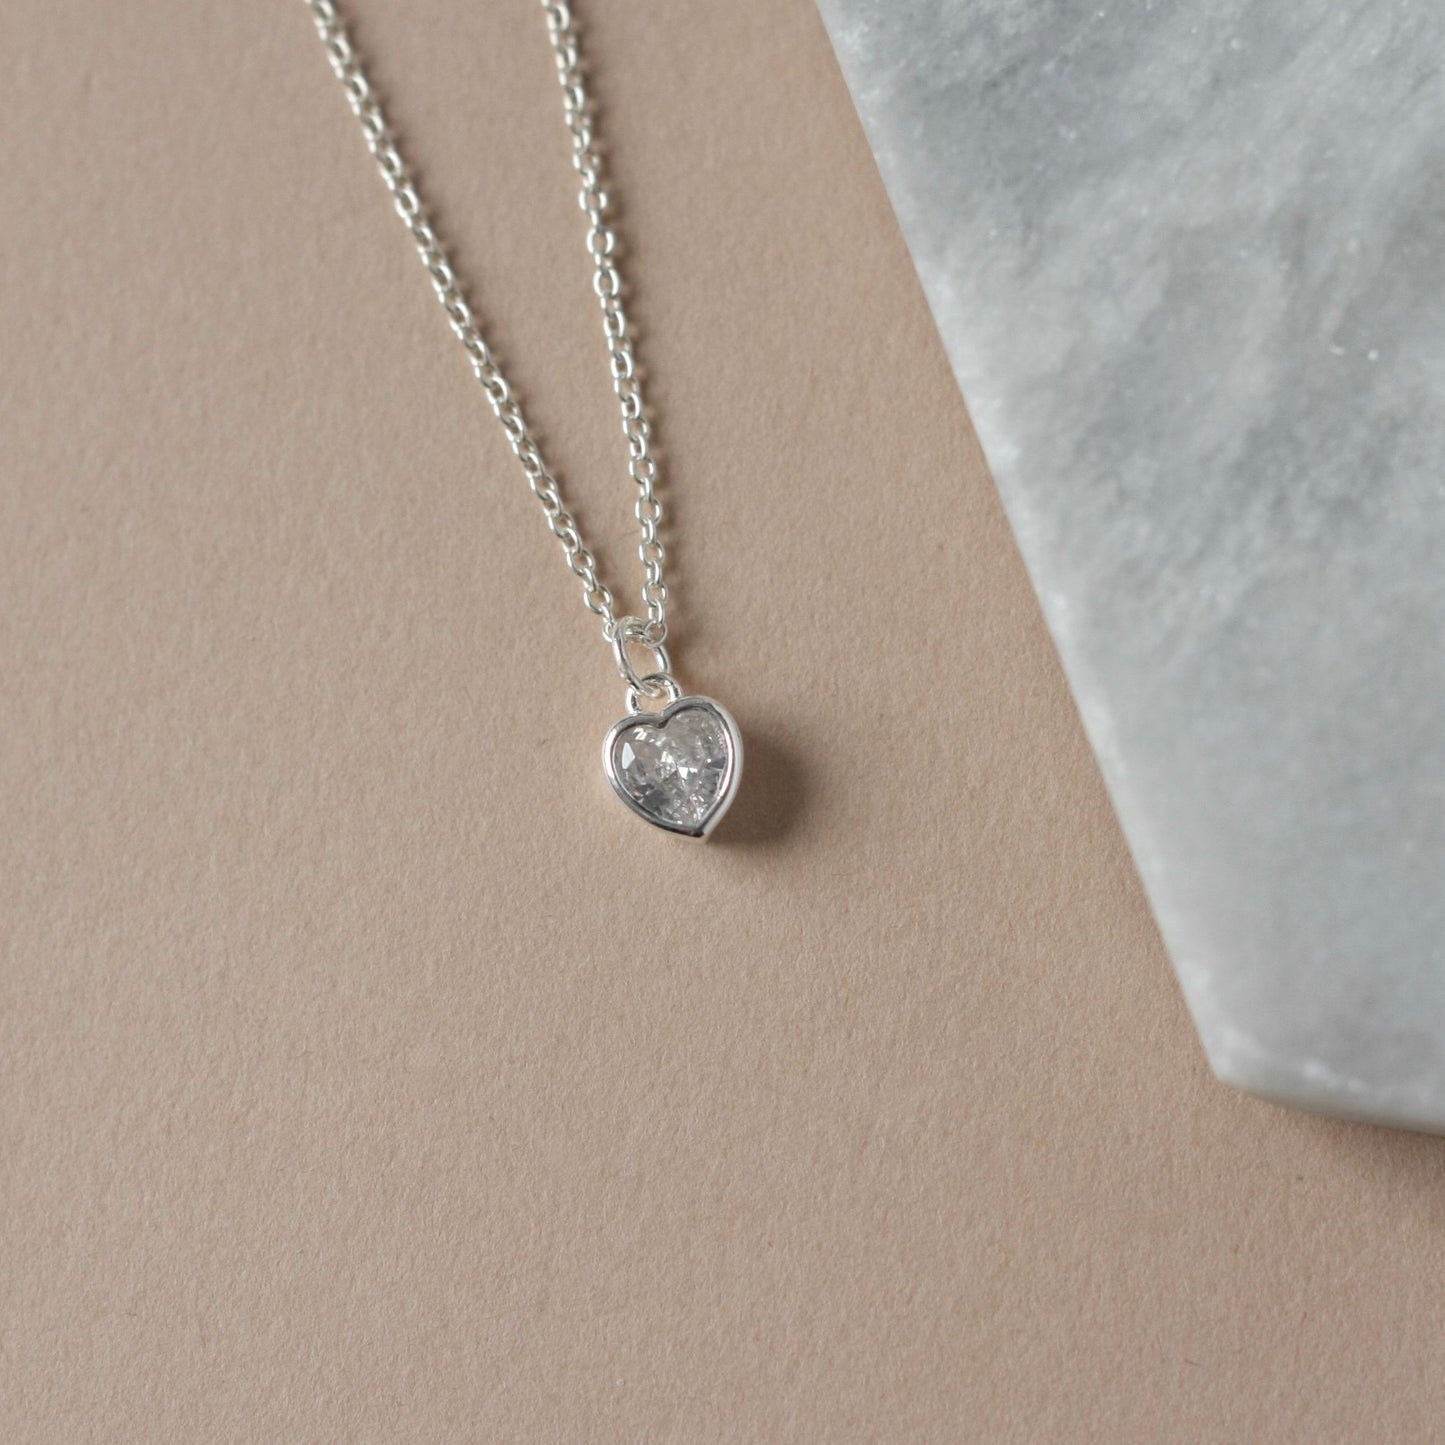 Dainty Sparkly Silver Heart Necklace